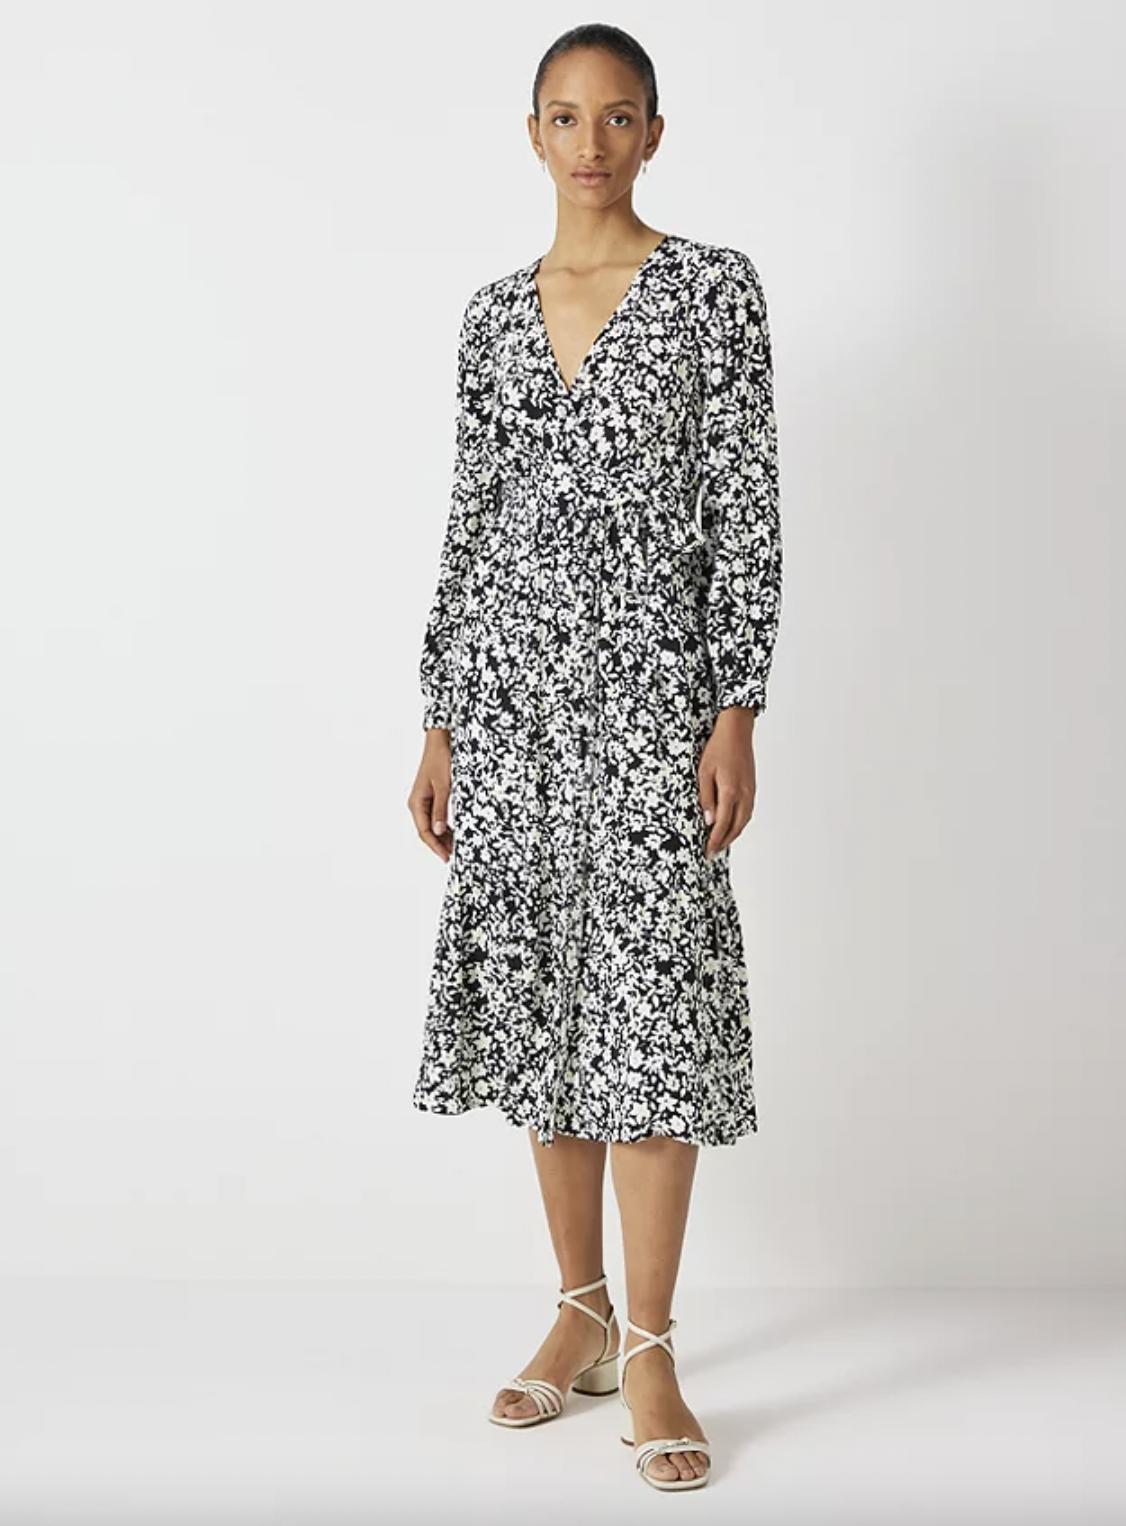 The John Lewis occasion summer dress to know about